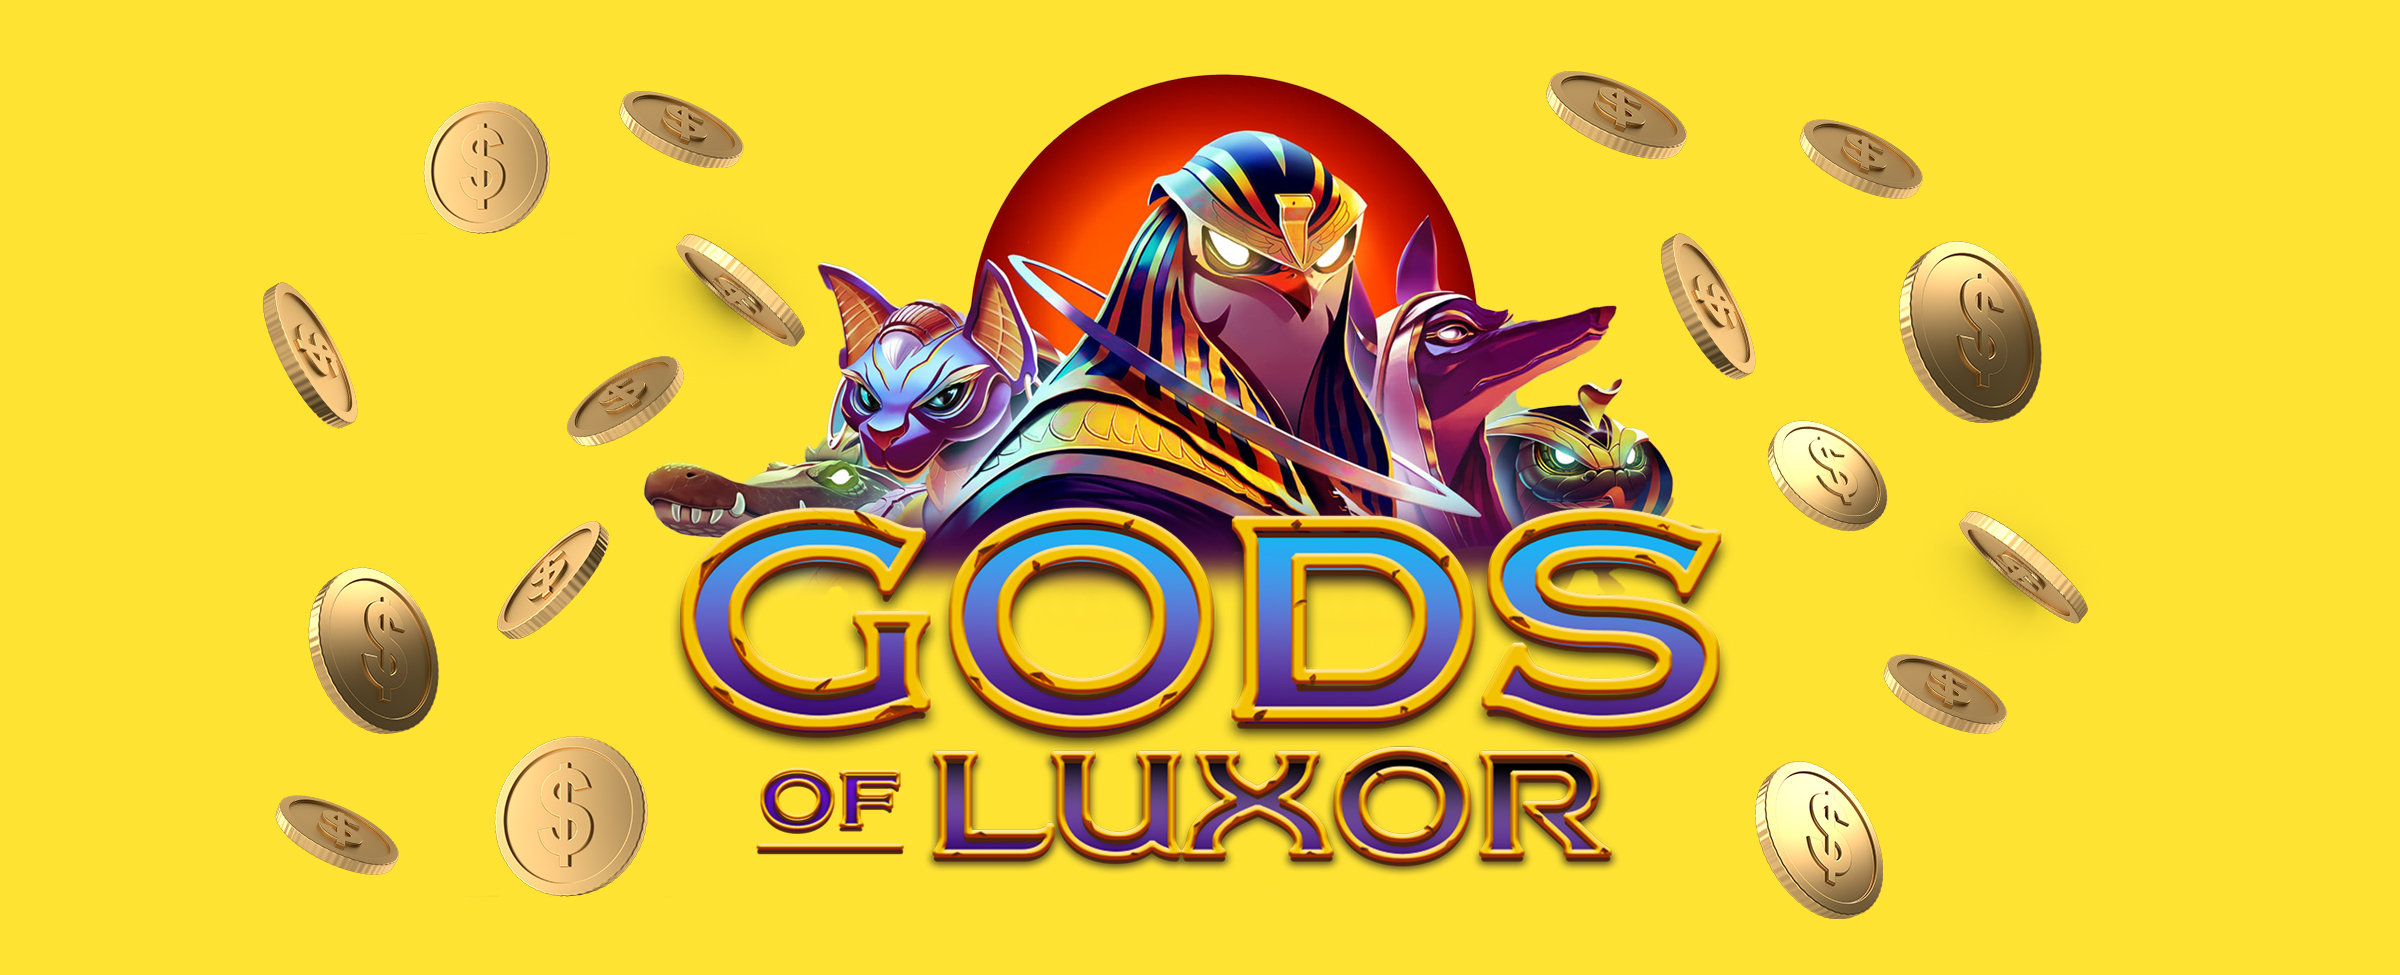 The logo consisting of 3D-animated characters from Cafe Casino’s slot game, Gods of Luxor, is pictured in the center of a yellow background, surrounded by gold coins.